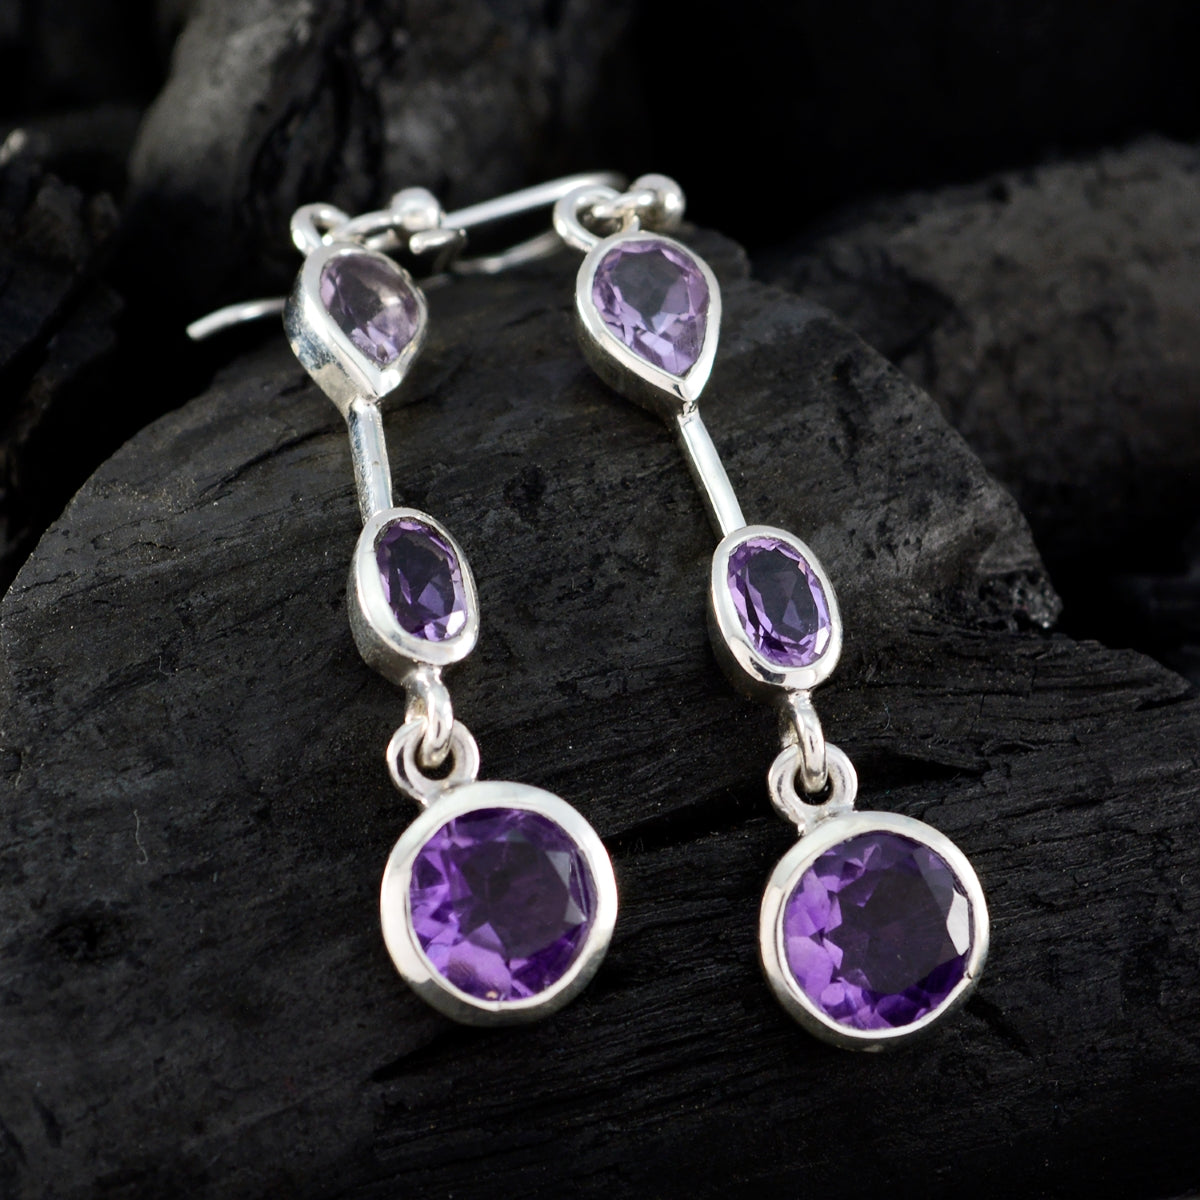 Riyo Natural Gemstone multi shape Faceted Purple Amethyst Silver Earring gift for wife